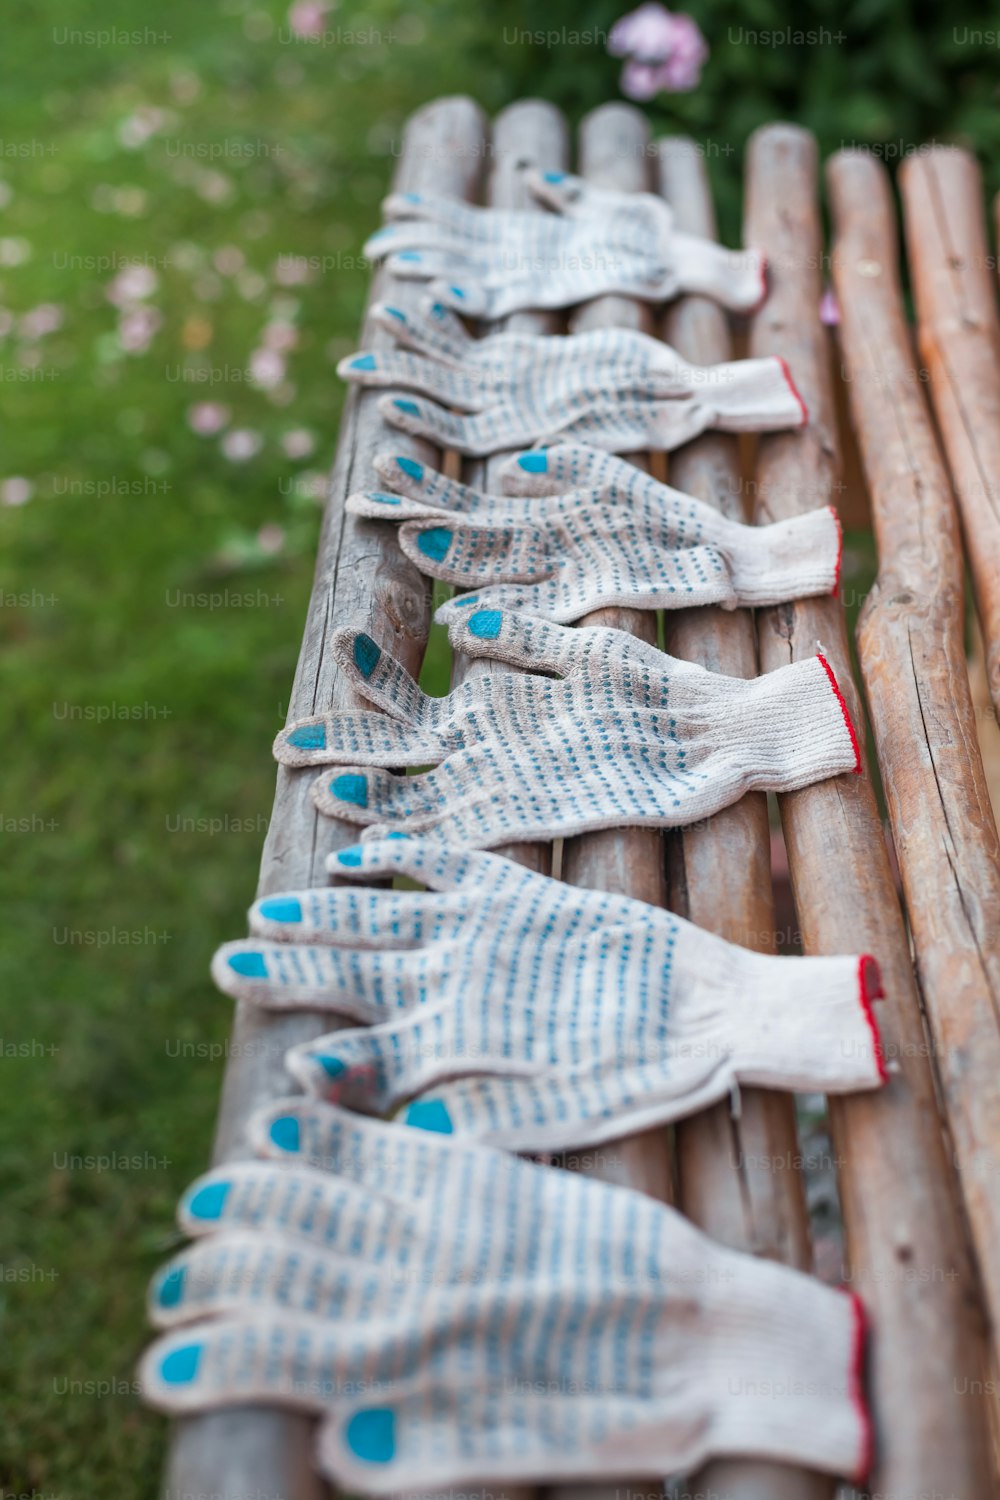 several pairs of gloves lined up on a wooden bench